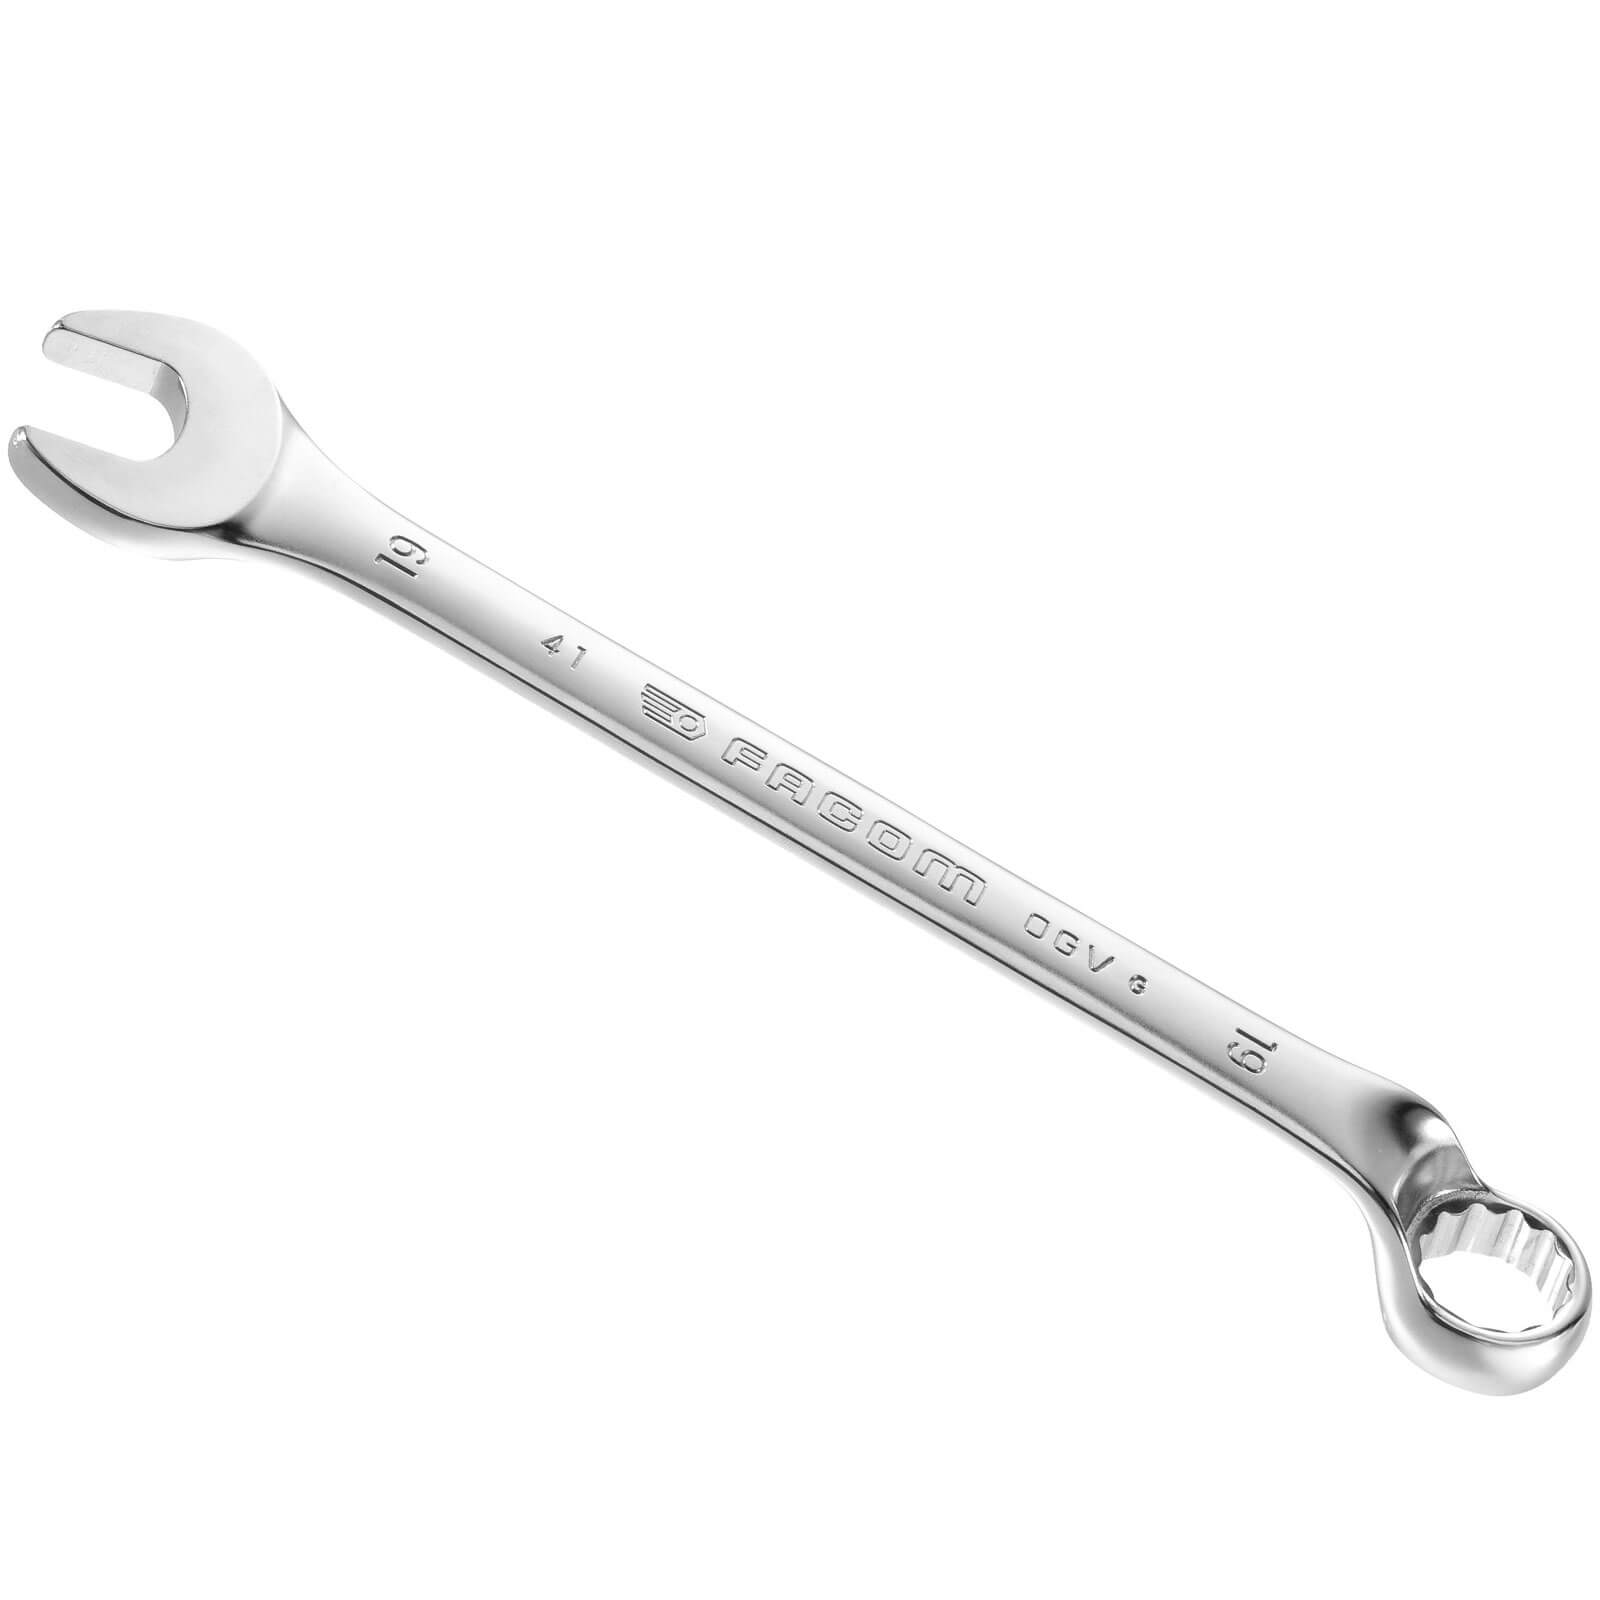 Photo of Facom 41 Series Offset Combination Spanner Metric 26mm